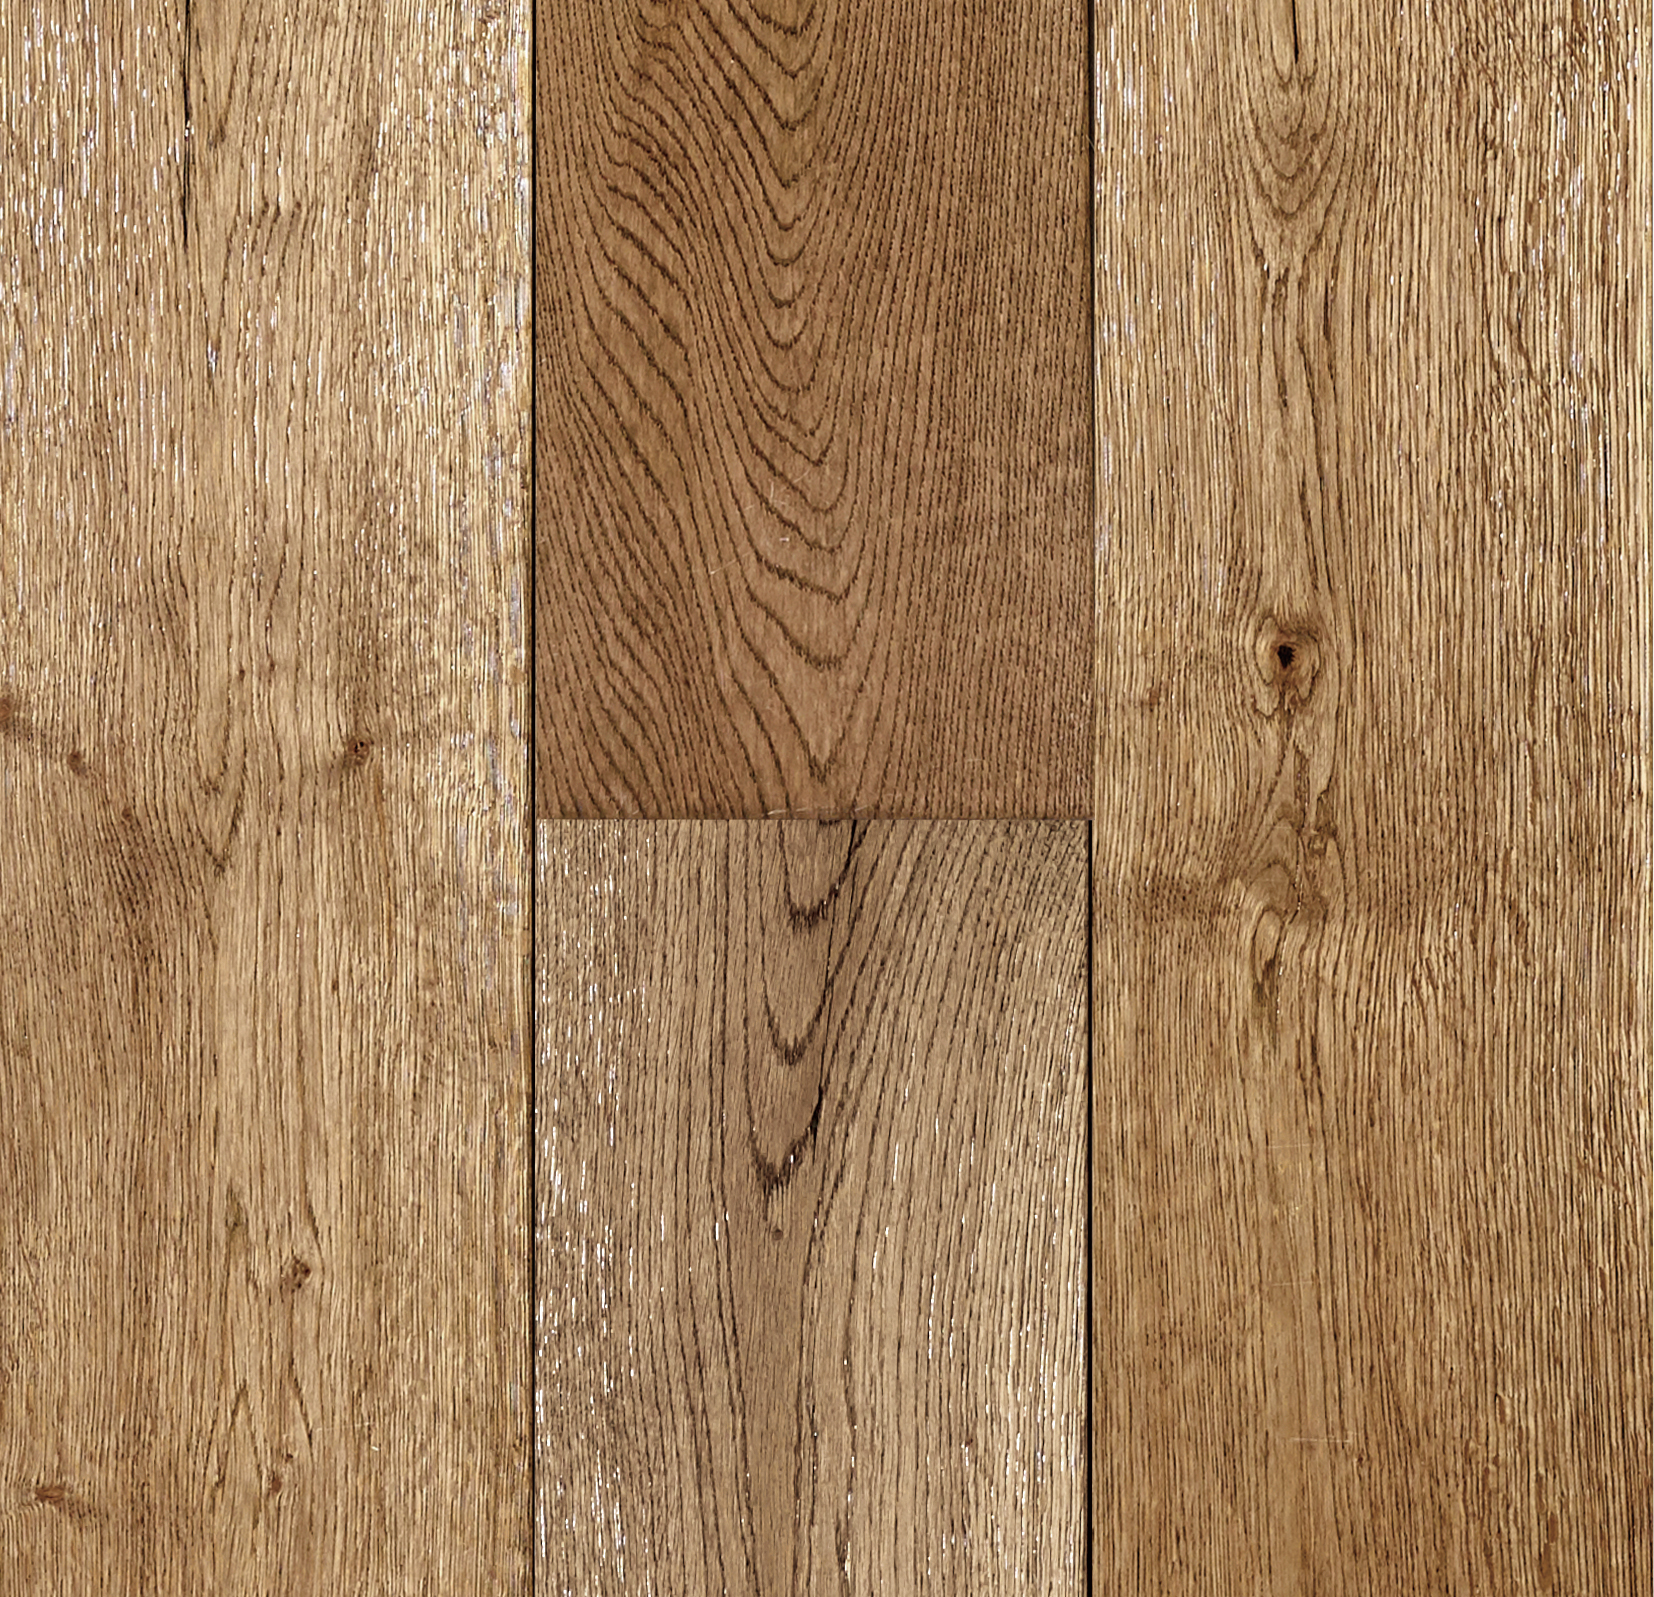 Nature Kissed H2uo147nk H2ome Urban, Nature’s Beauty Hardwood Flooring